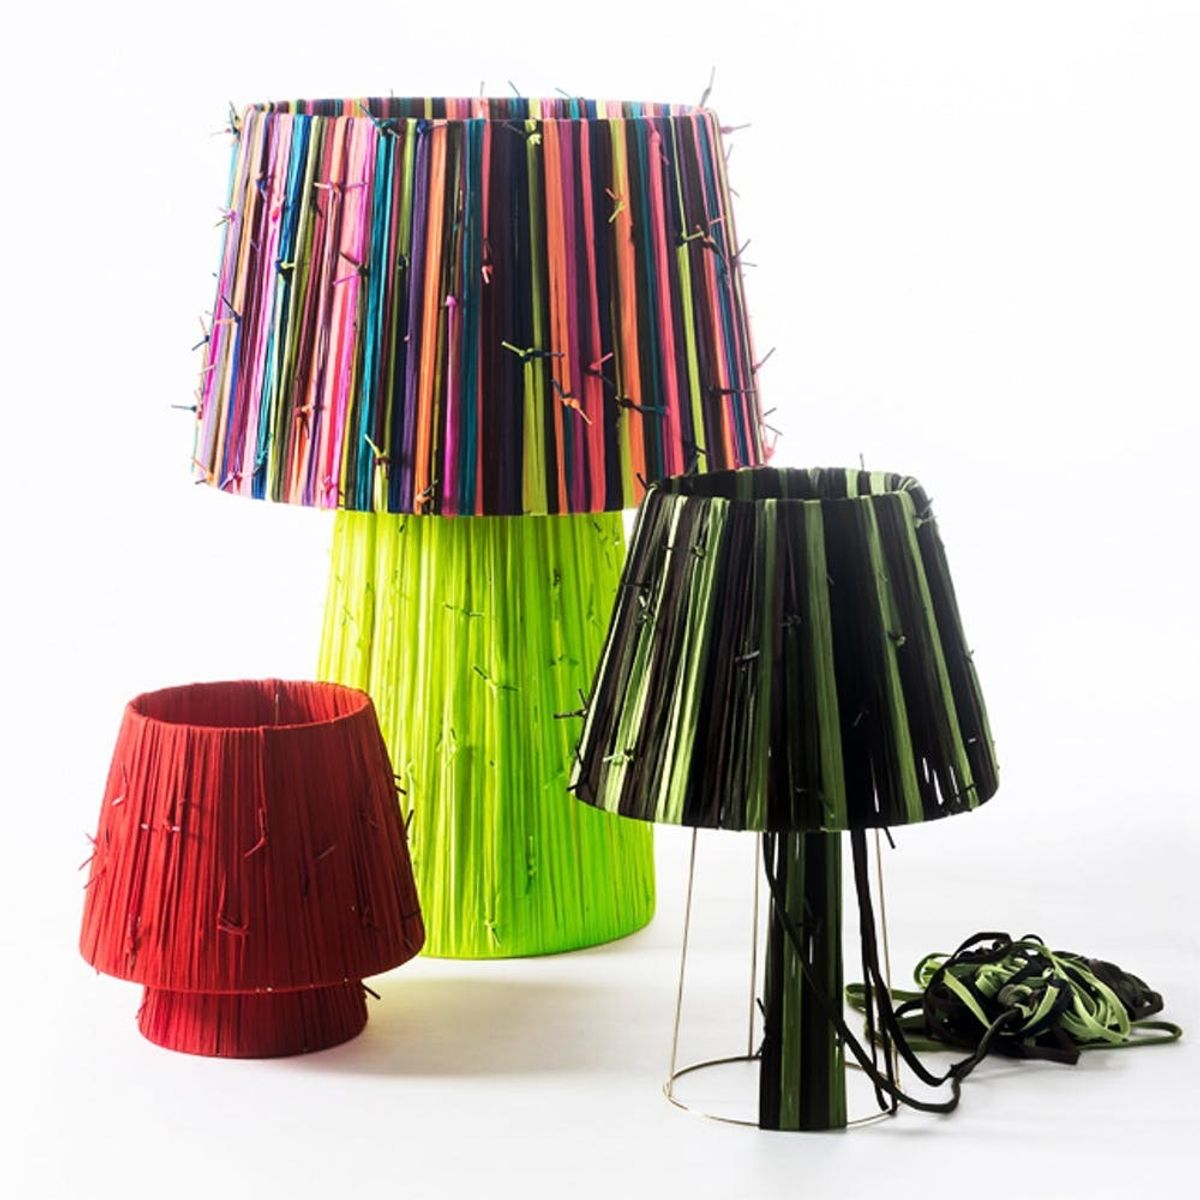 Your Next Lampshades May Be Made of Shoelaces